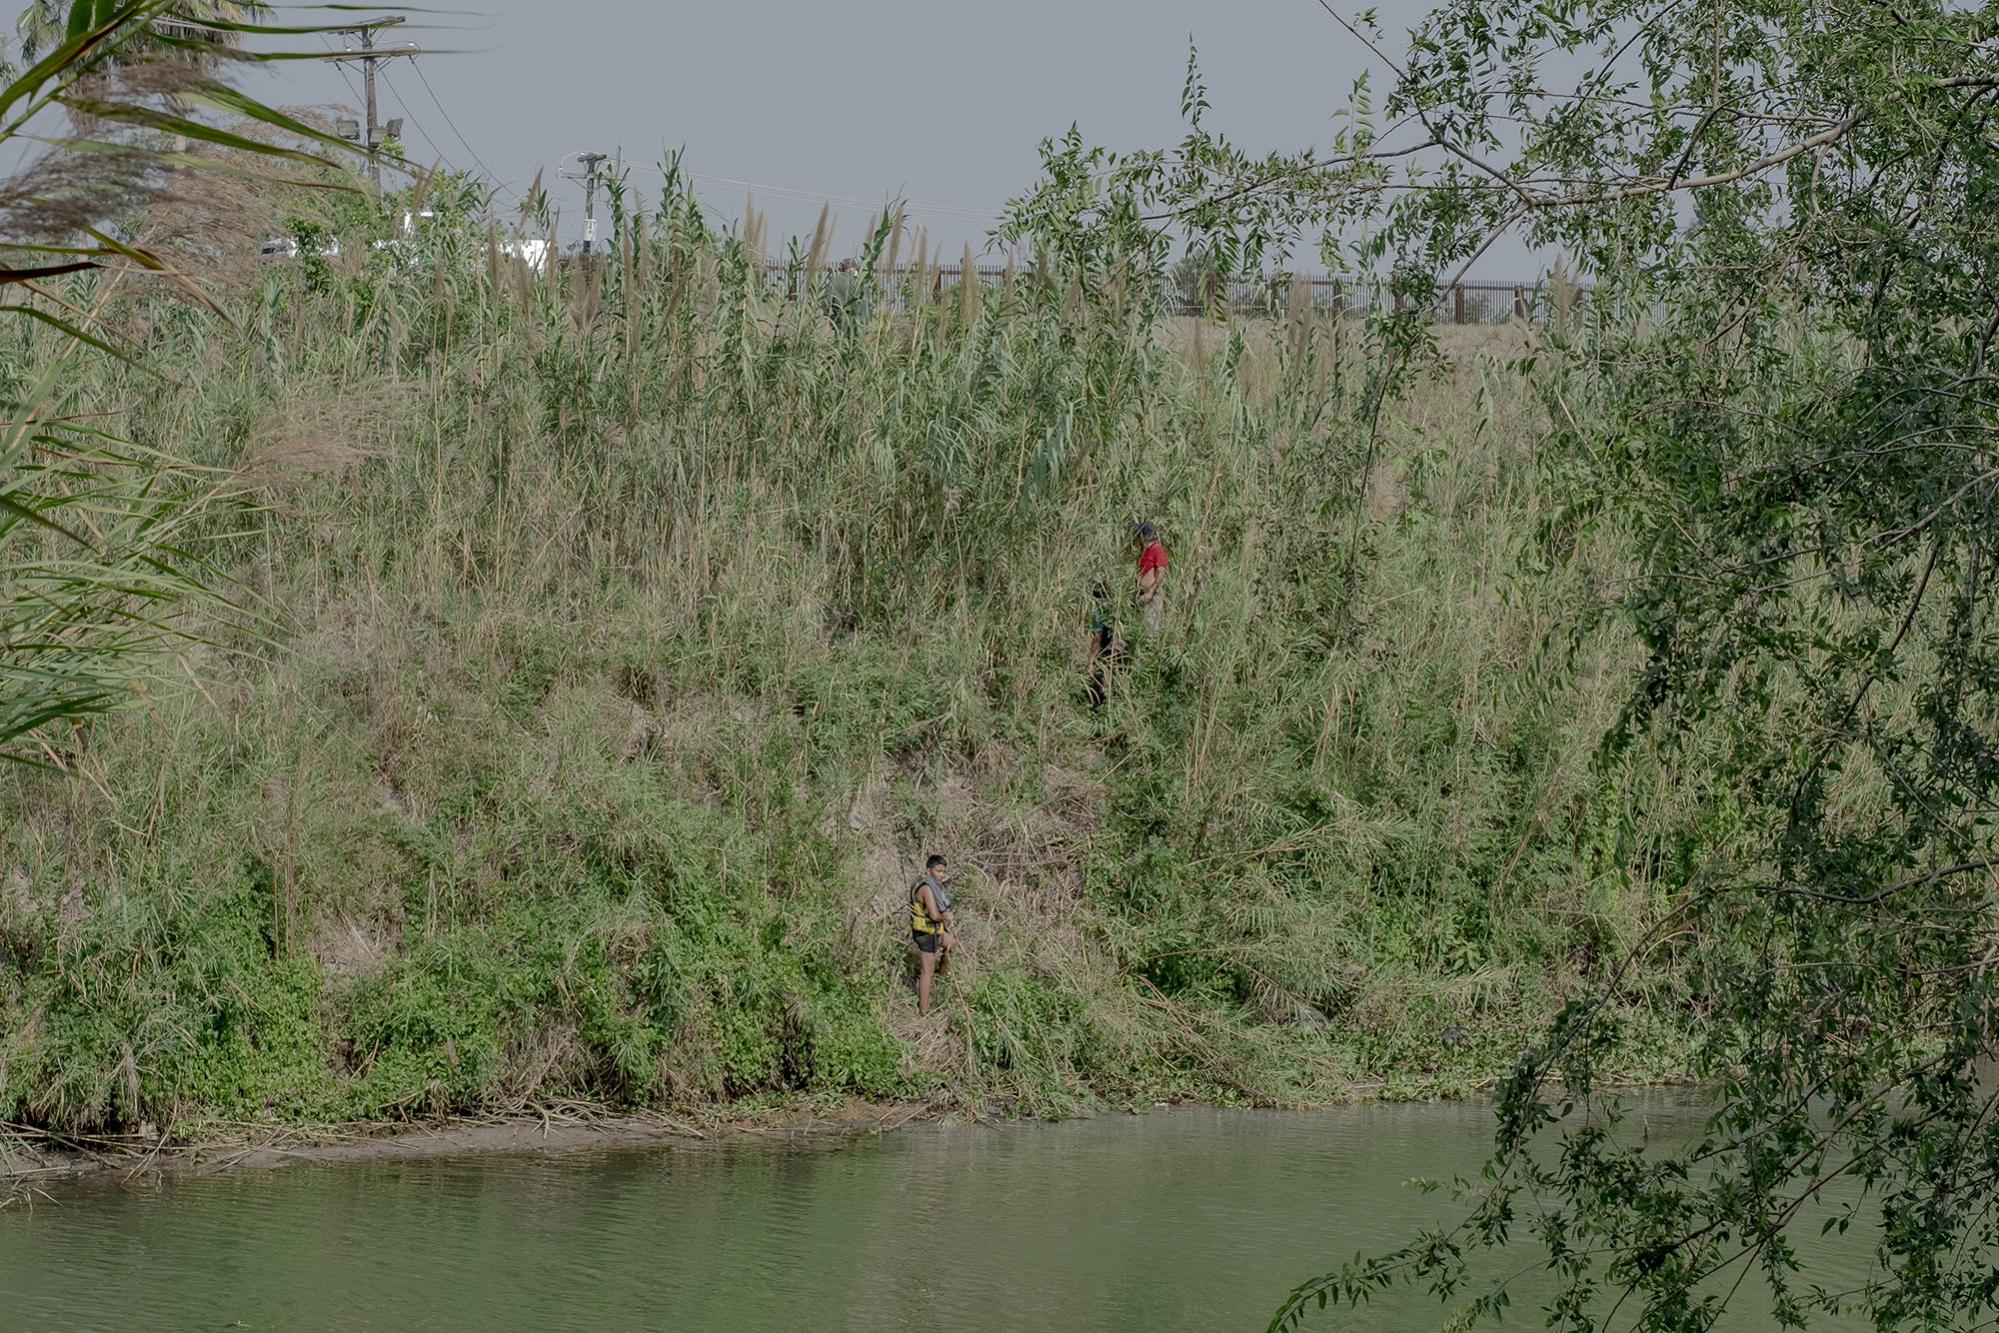 Three migrants attempted to cross the Rio Bravo into the United States by swimming across the river. They did not succeed because they were detected by several U.S. Customs and Border Protection (CBP) border patrols, so they decided to go back to the Mexiccan side. The photo was taken discreetly, as members of the criminal group that controls part of Matamoros were watching the scene from a truck. Less than a mile from here is a commemorative cross by the river where the bodies of Salvadorans Oscar and Valeria, known around the world for drowning while crossing, were found. Photo from El Faro: Fred Ramos.